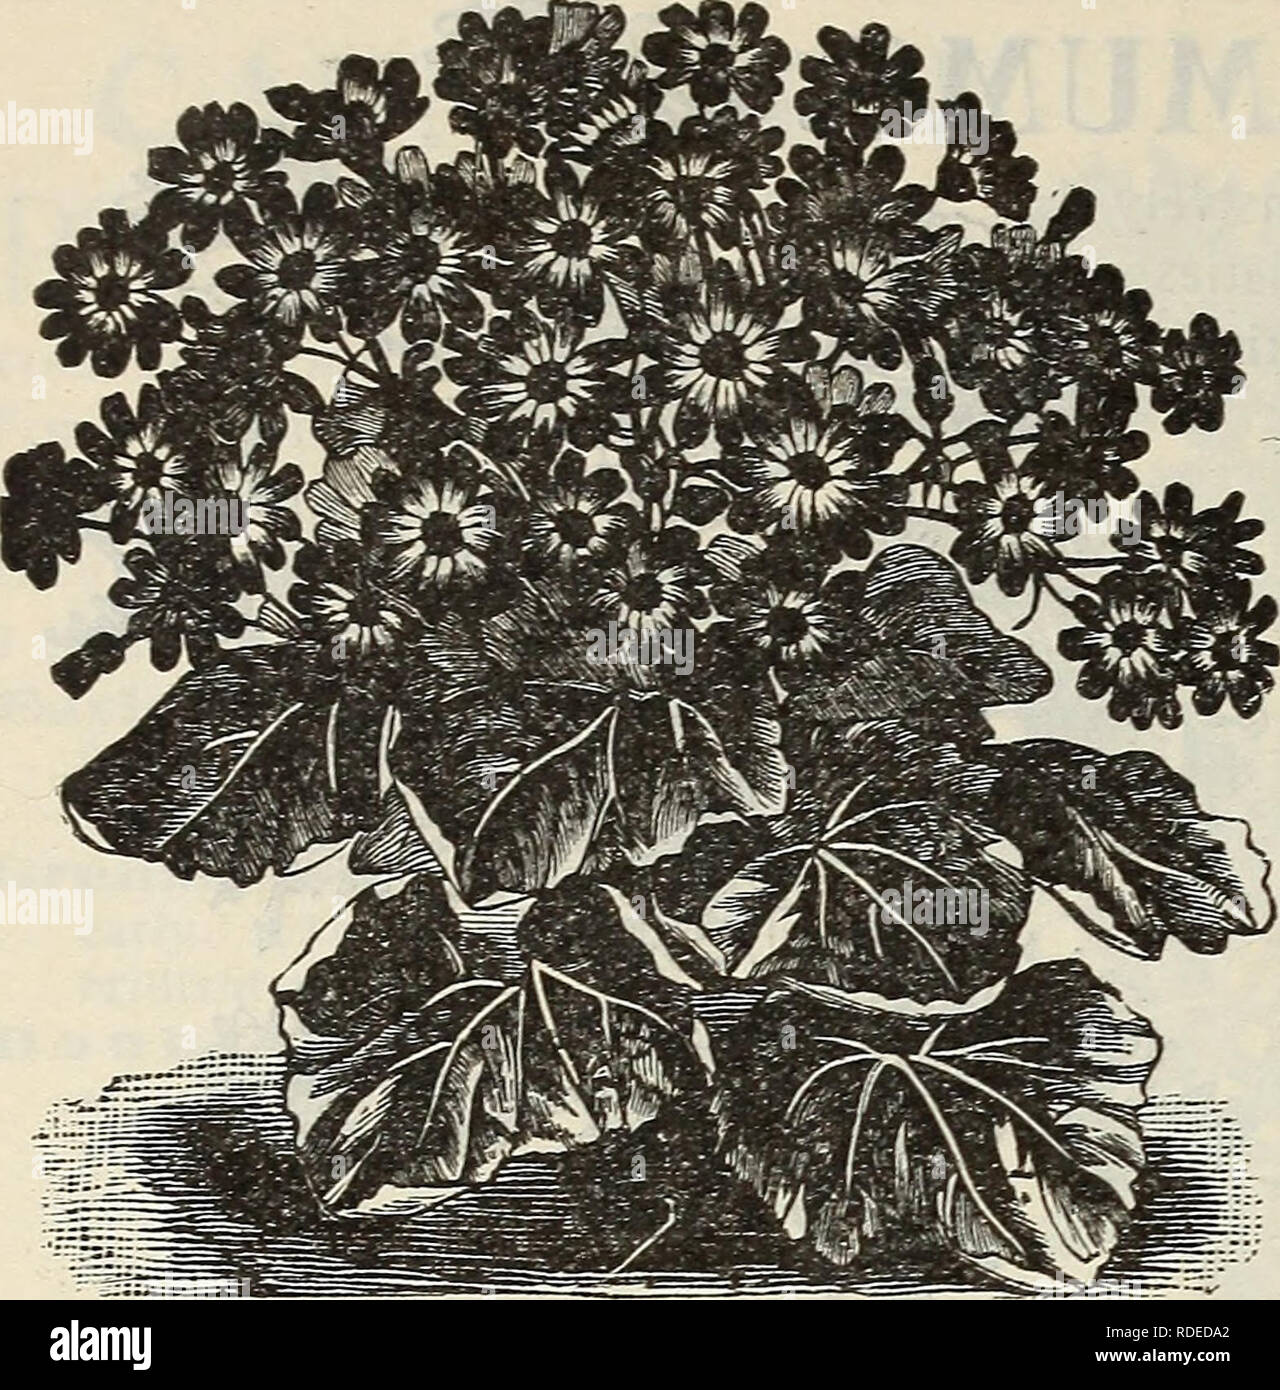 . E. H. Hunt : seedsman. Nurseries (Horticulture) Illinois Chicago Catalogs; Bulbs (Plants) Catalogs; Flowers Catalogs; Vegetables Seeds Catalogs; Plants, Ornamental Catalogs. 52 E. H. HUNT, SEEDSMAN, CHICAGO, ILLINOIS.. CINERARIA. CLIANTHUS DAMFIERI- OR, &quot;AUSTRALIAN GLORY PEA.&quot; One of the most beautiful plants grown either for the greenhouse or border: the flowers are of scarlet blotched with black, and are borne in clusters; in habit a shrubby trailer; an annual and cannot be transplanted. 10c. COCCINEA INDICA. A pretty climber with bright luxuriant, ivy-like foliage; flowers are s Stock Photo